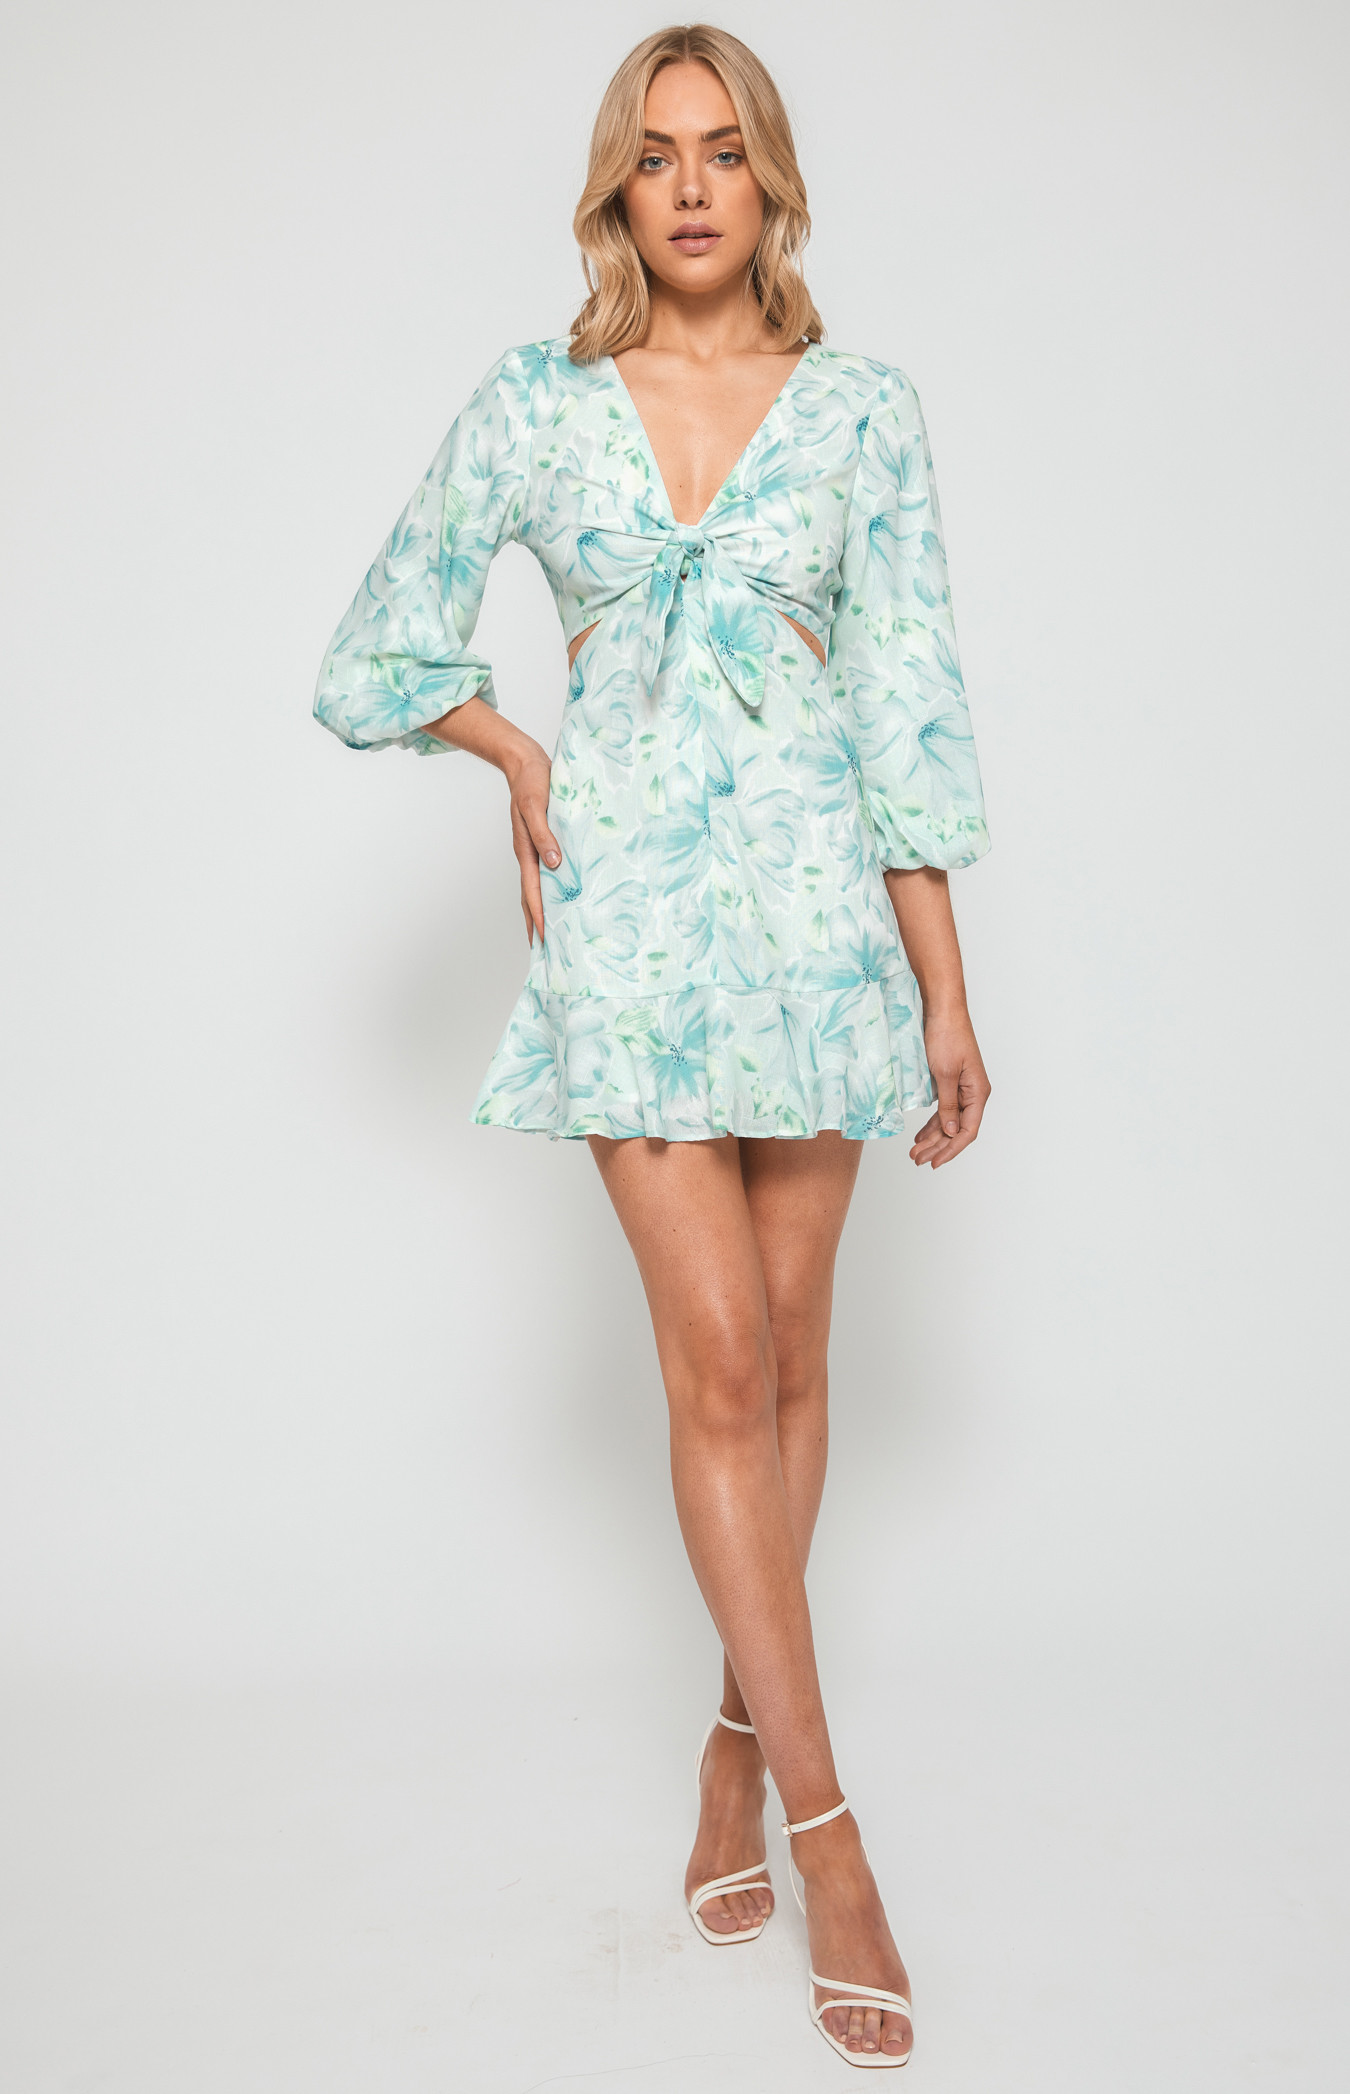 Floral Dress with Front Tie and Cut Out Details (WDR499A)